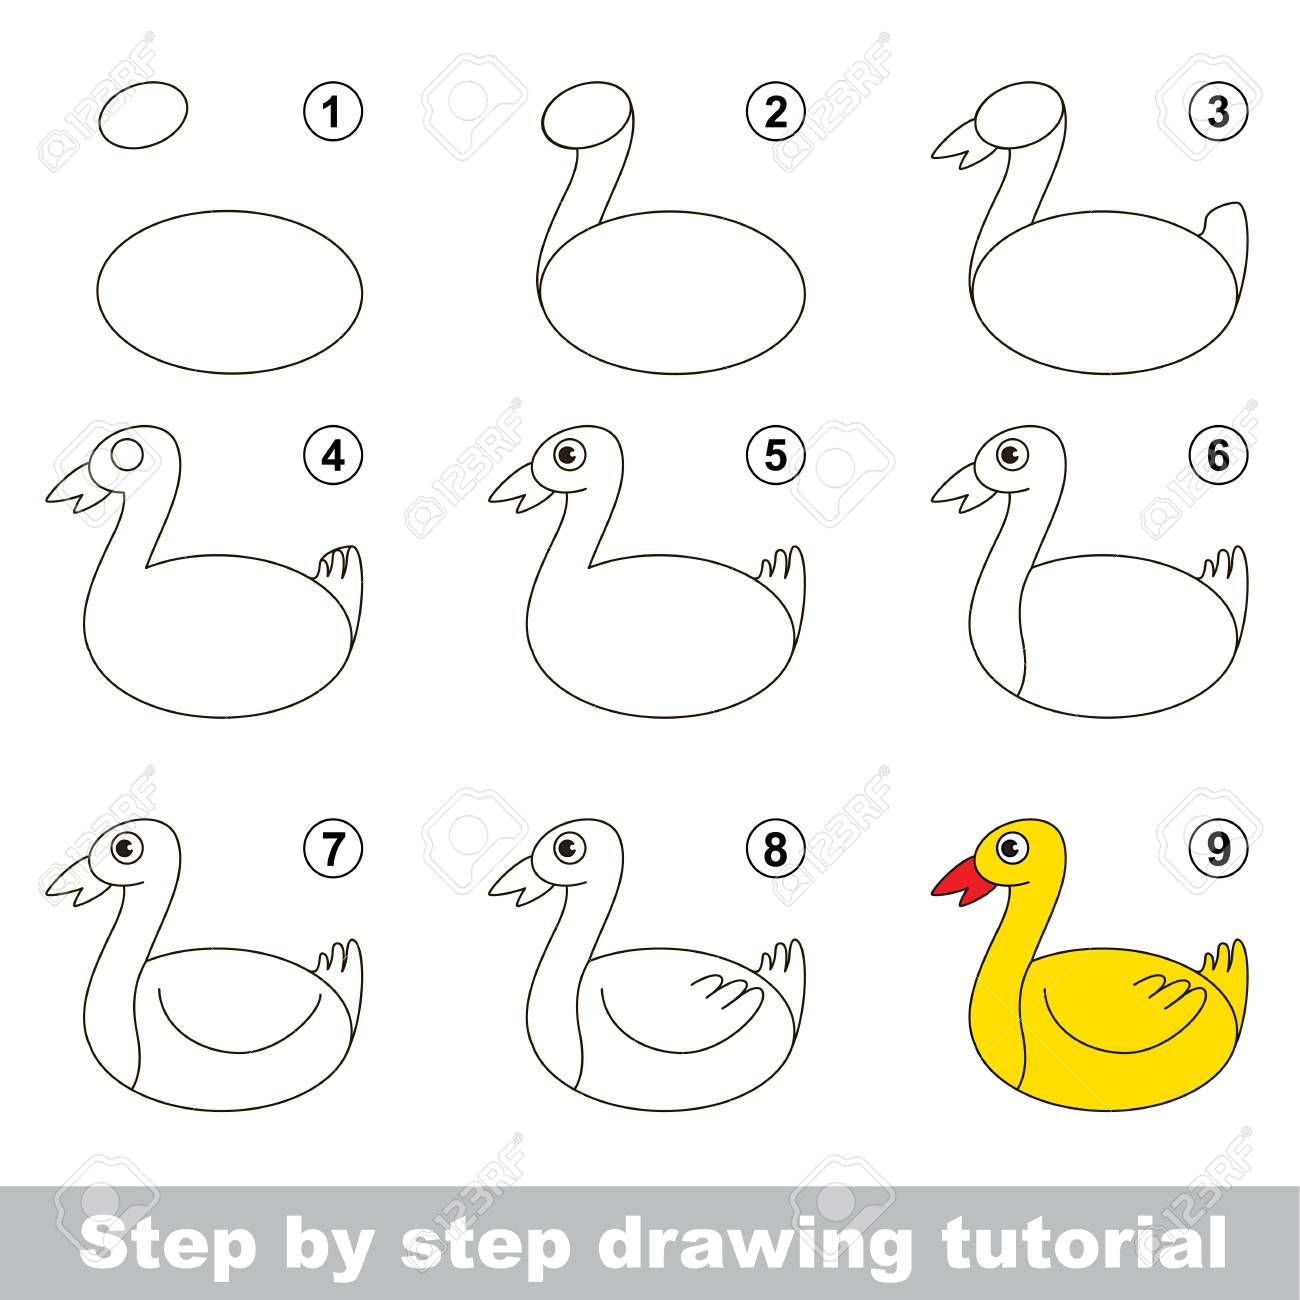 Donald Duck Drawing Step By Step at